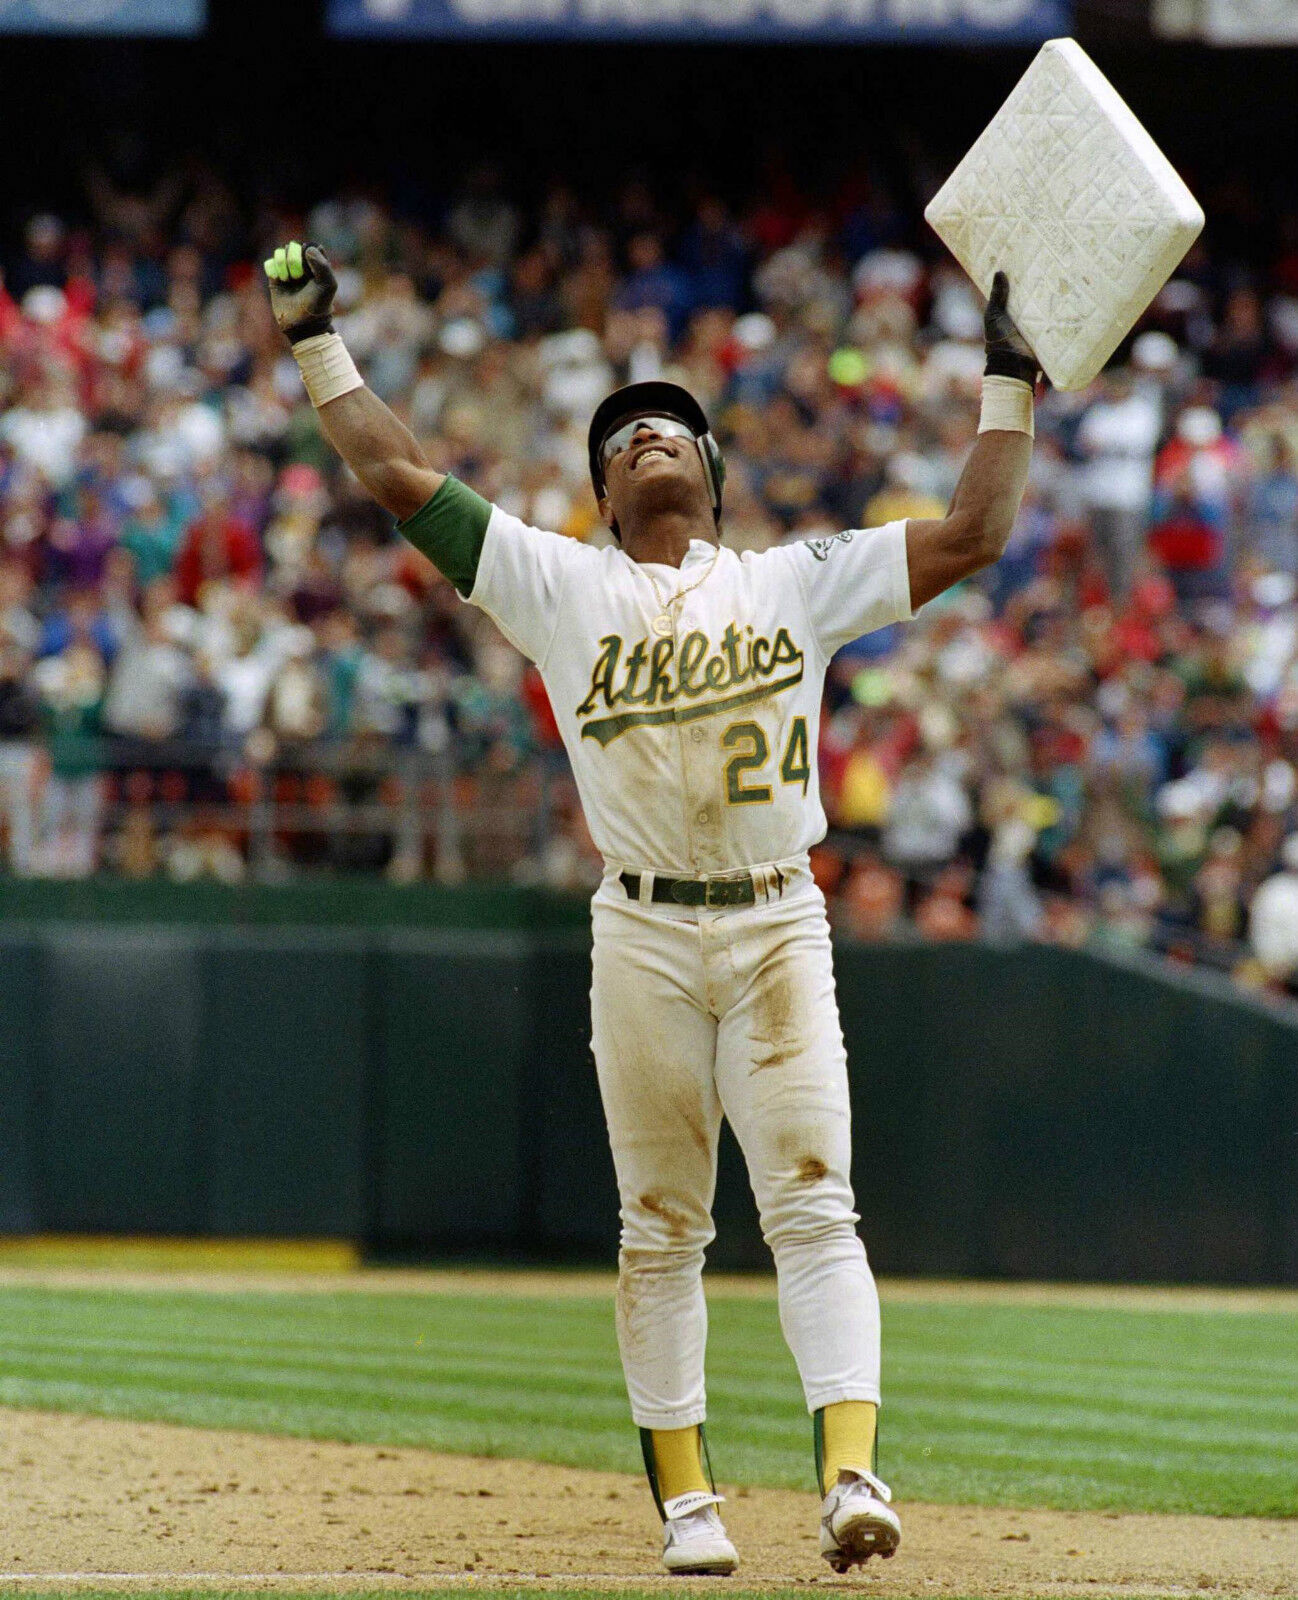 I made a Rickey Henderson mobile wallpaper, Let me know what you